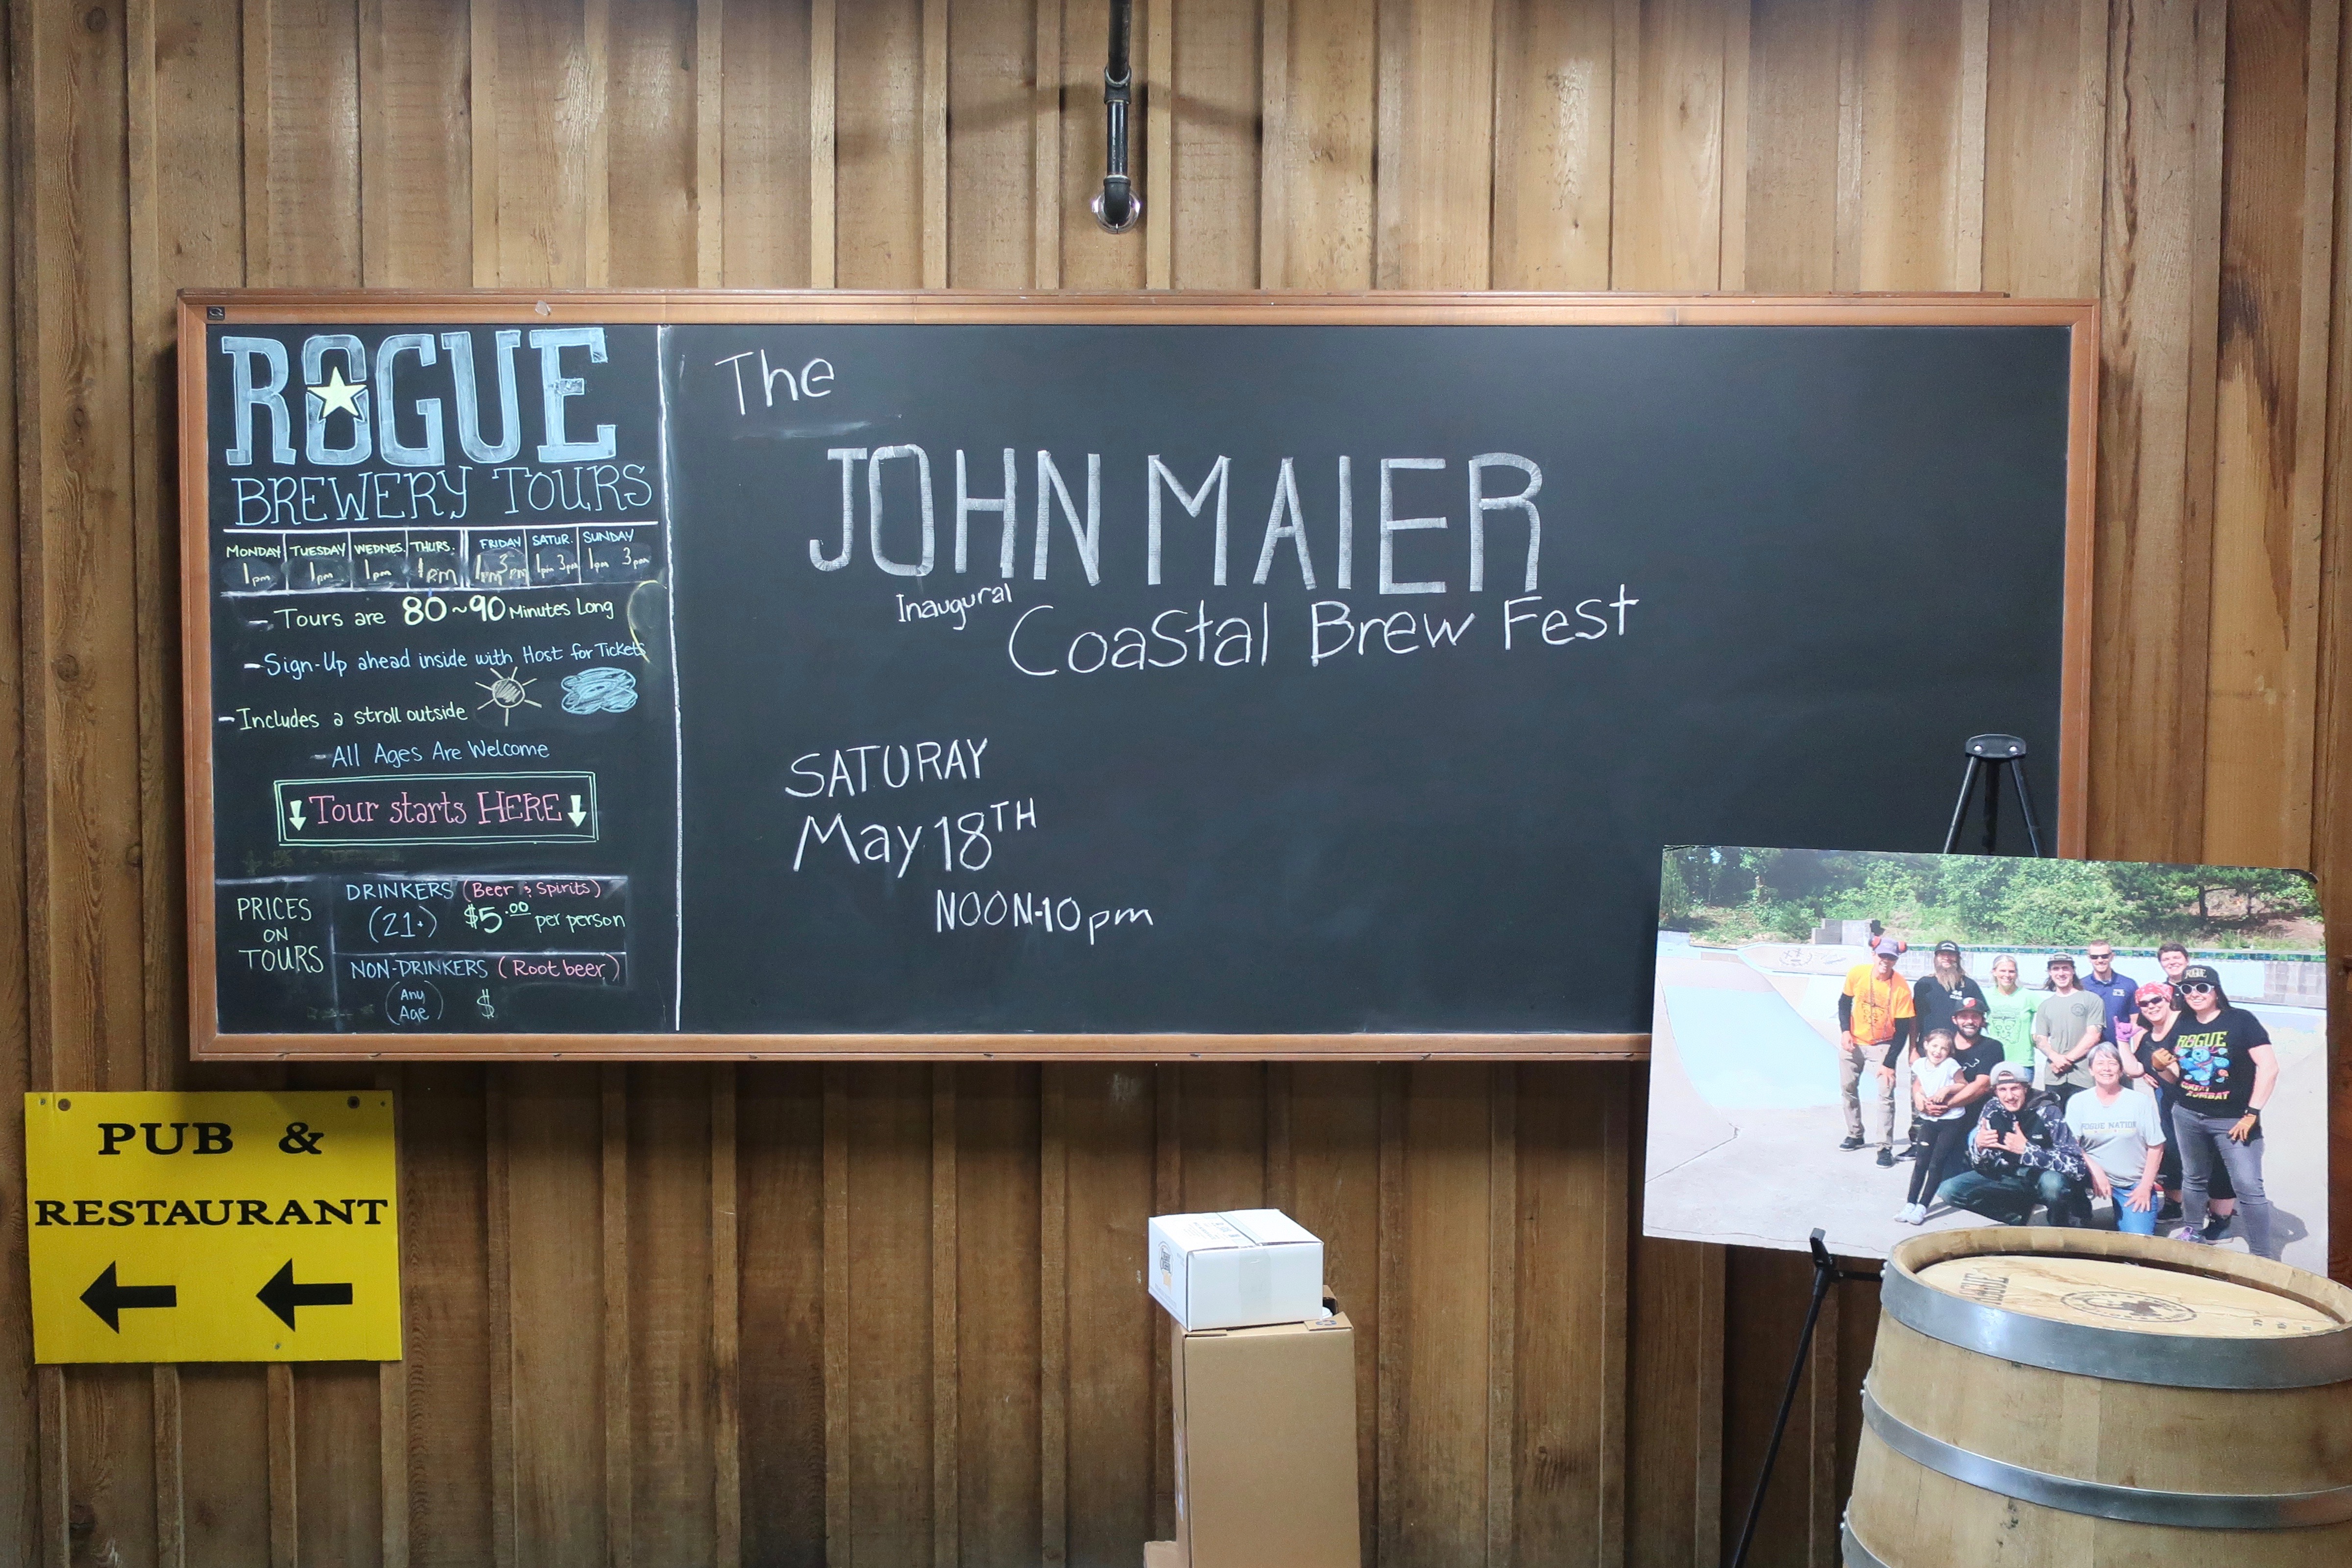 The John Maier Coastal Brew Fest took place on May 18, 2019 in Newport, Oregon at Rogue Ales.